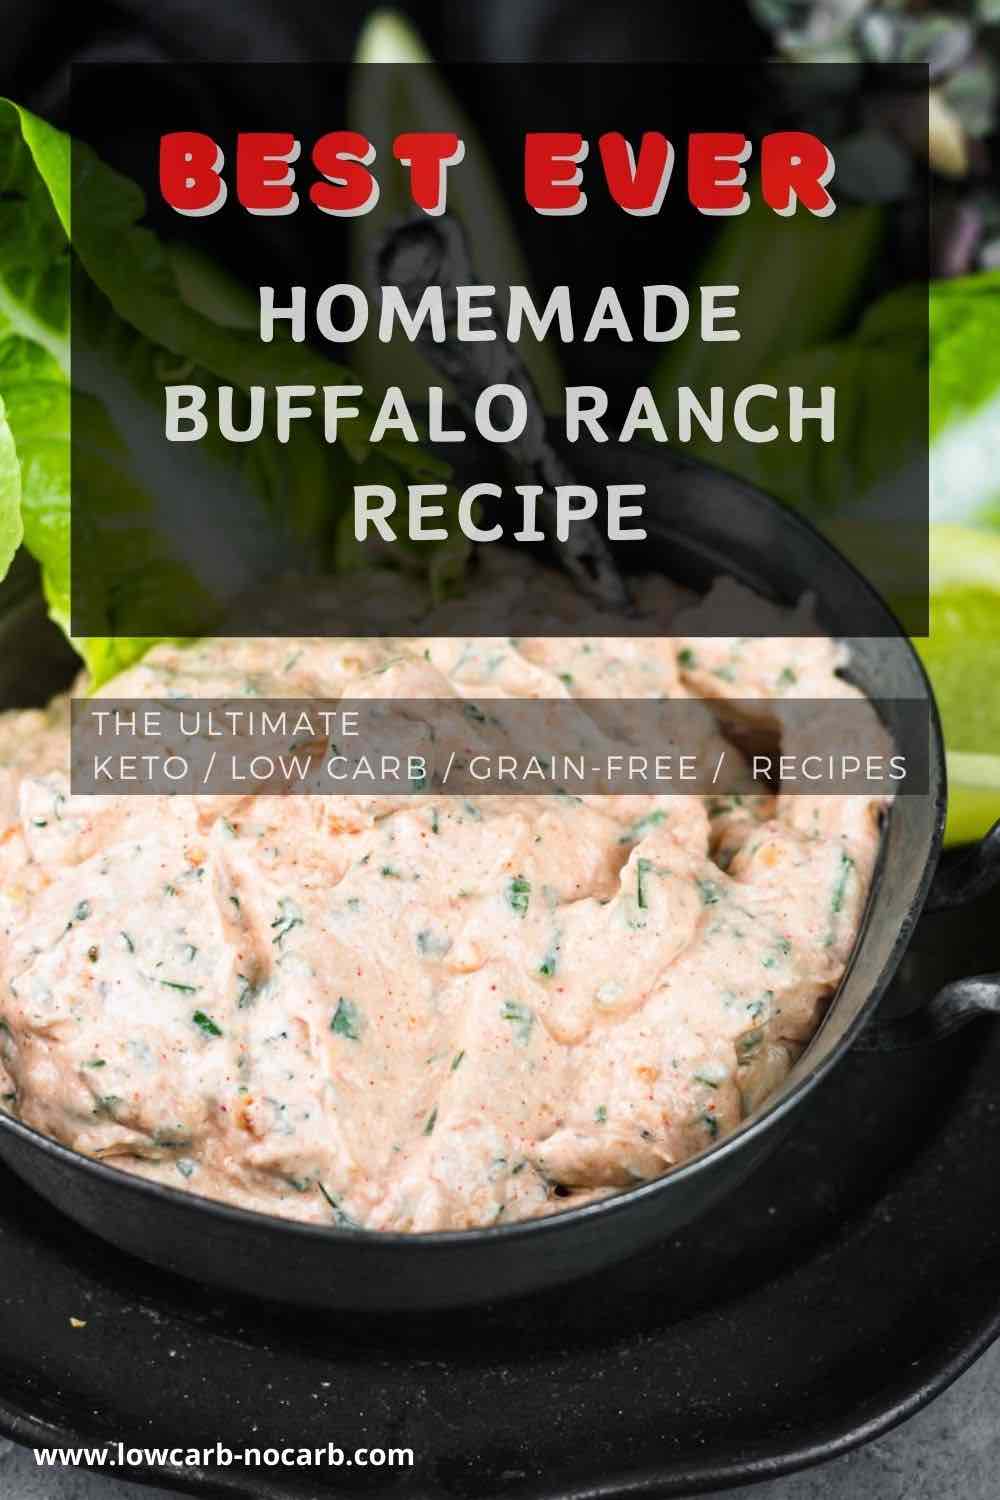 A graphic promoting a recipe for homemade buffalo ranch with diet-friendly labels such as keto, low carb, and grain-free.